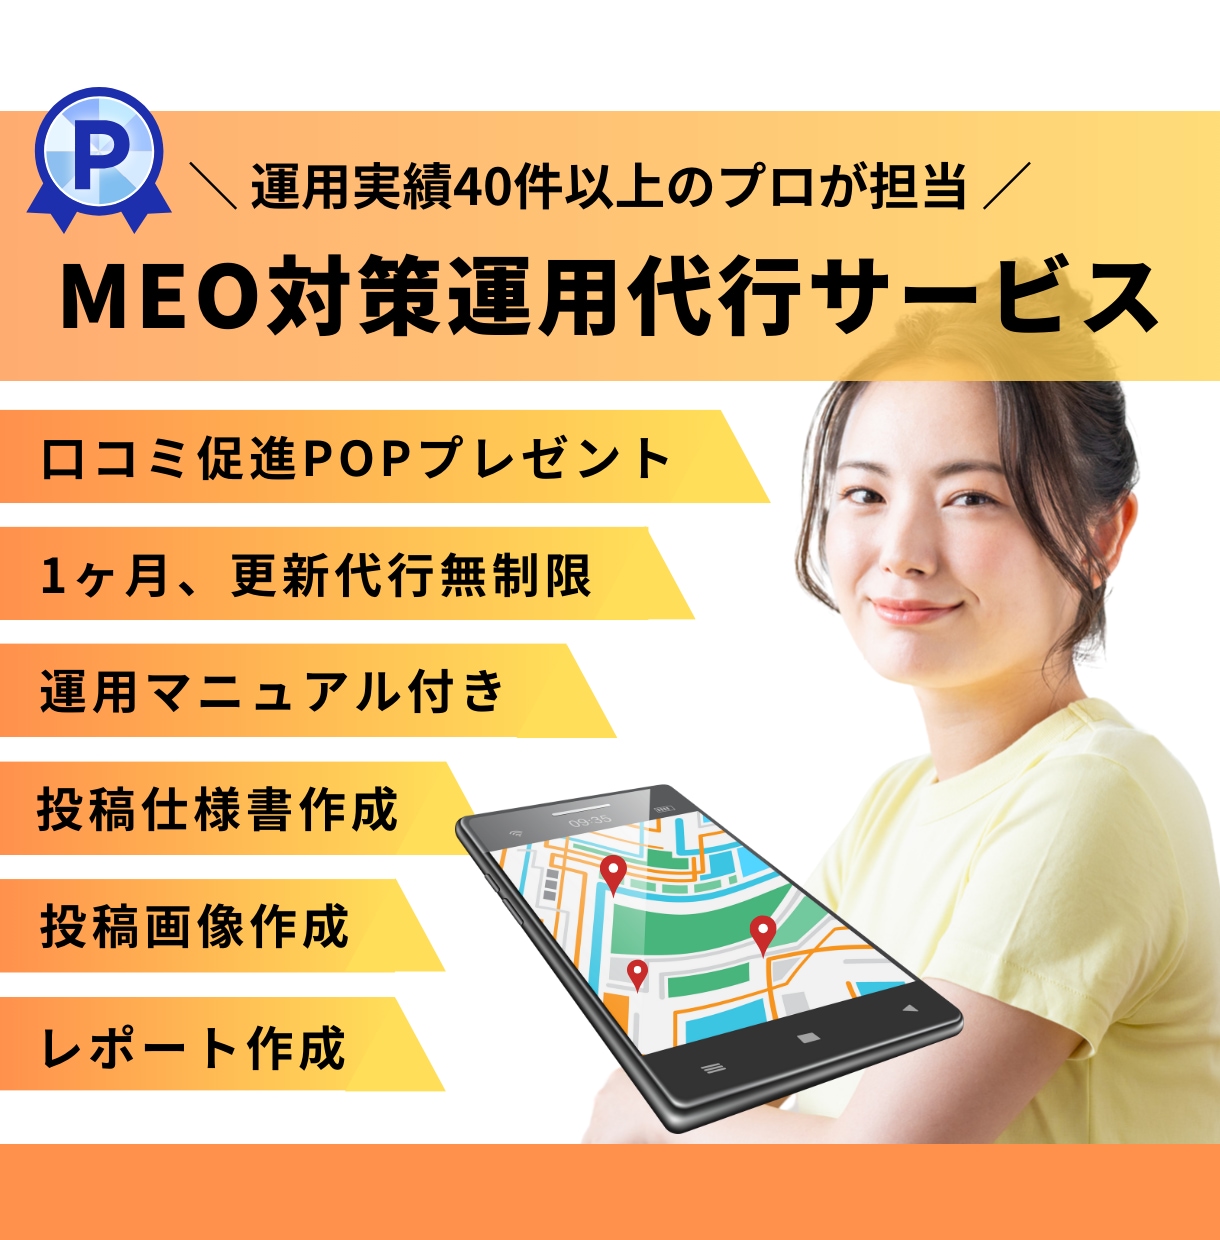 💬Coconala｜MEO measures! A professional will handle the operation for you for one month.
               Minami@Over 180 production results
                …